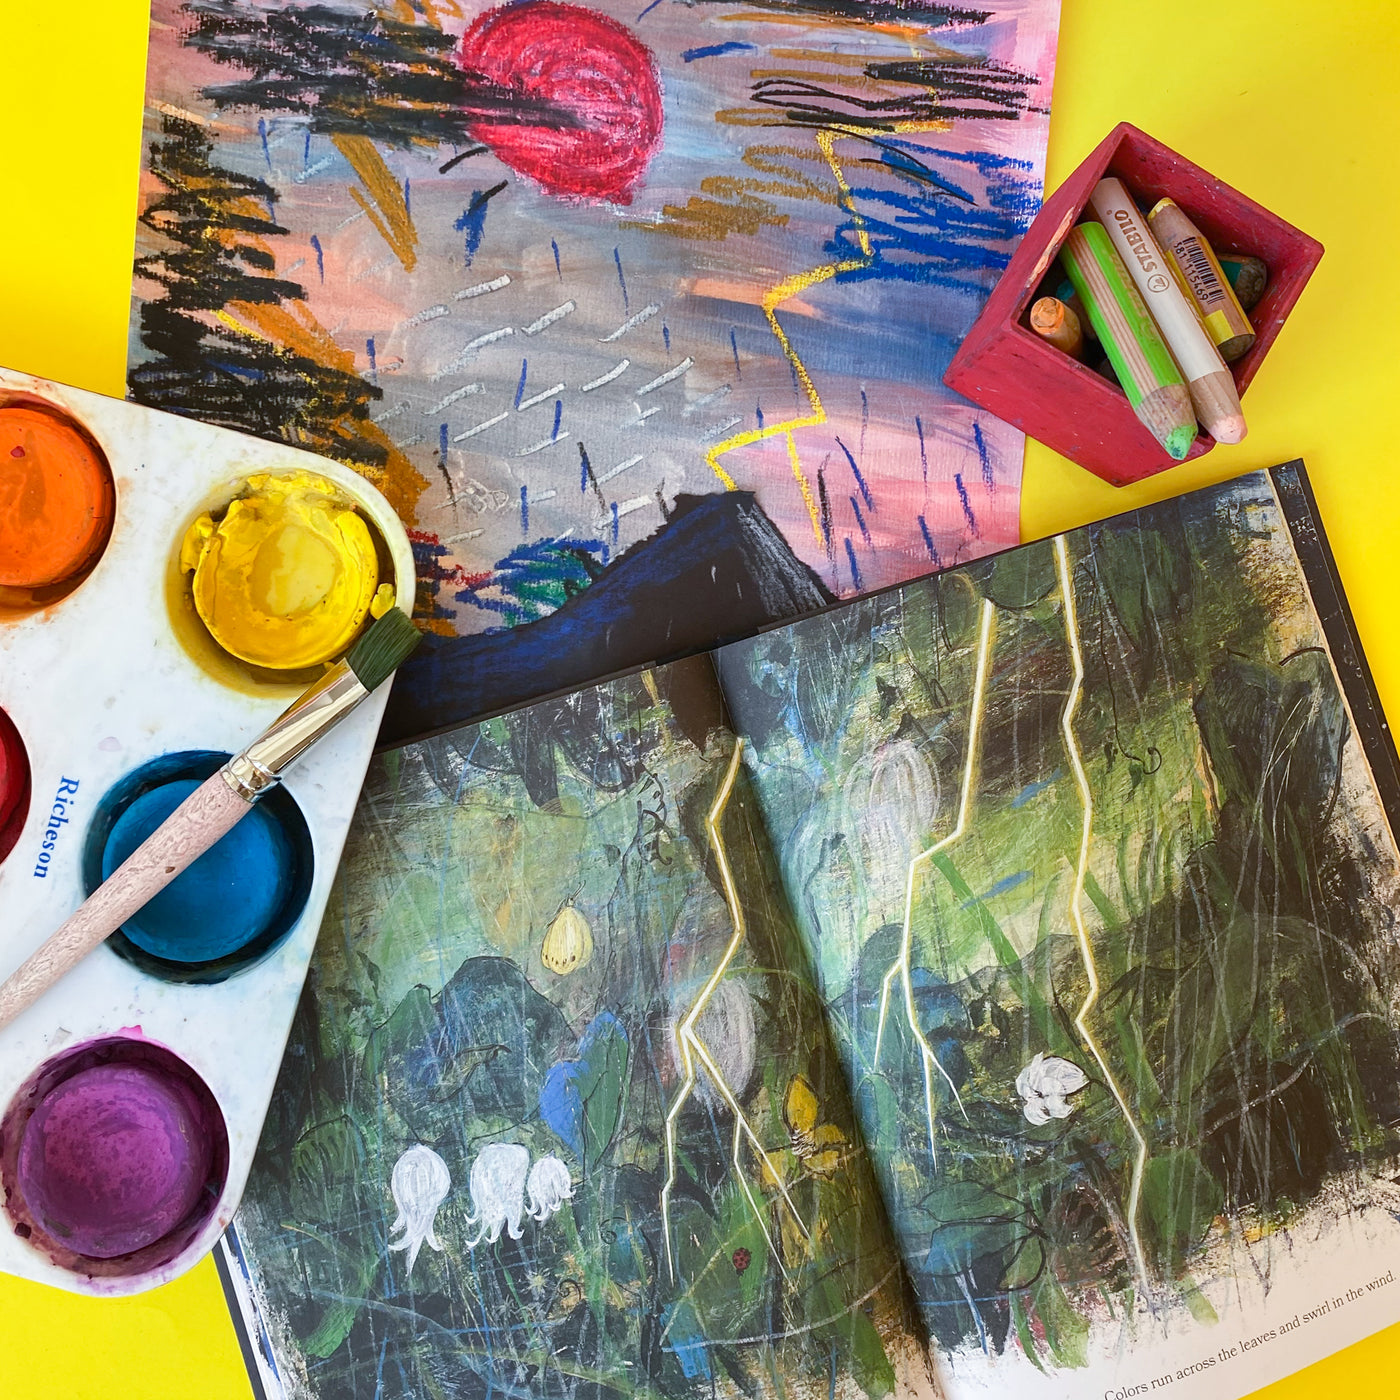 Online Mixed Media Art Class for Kids aged 3 to 8 years inspired by the book Every Color of Light